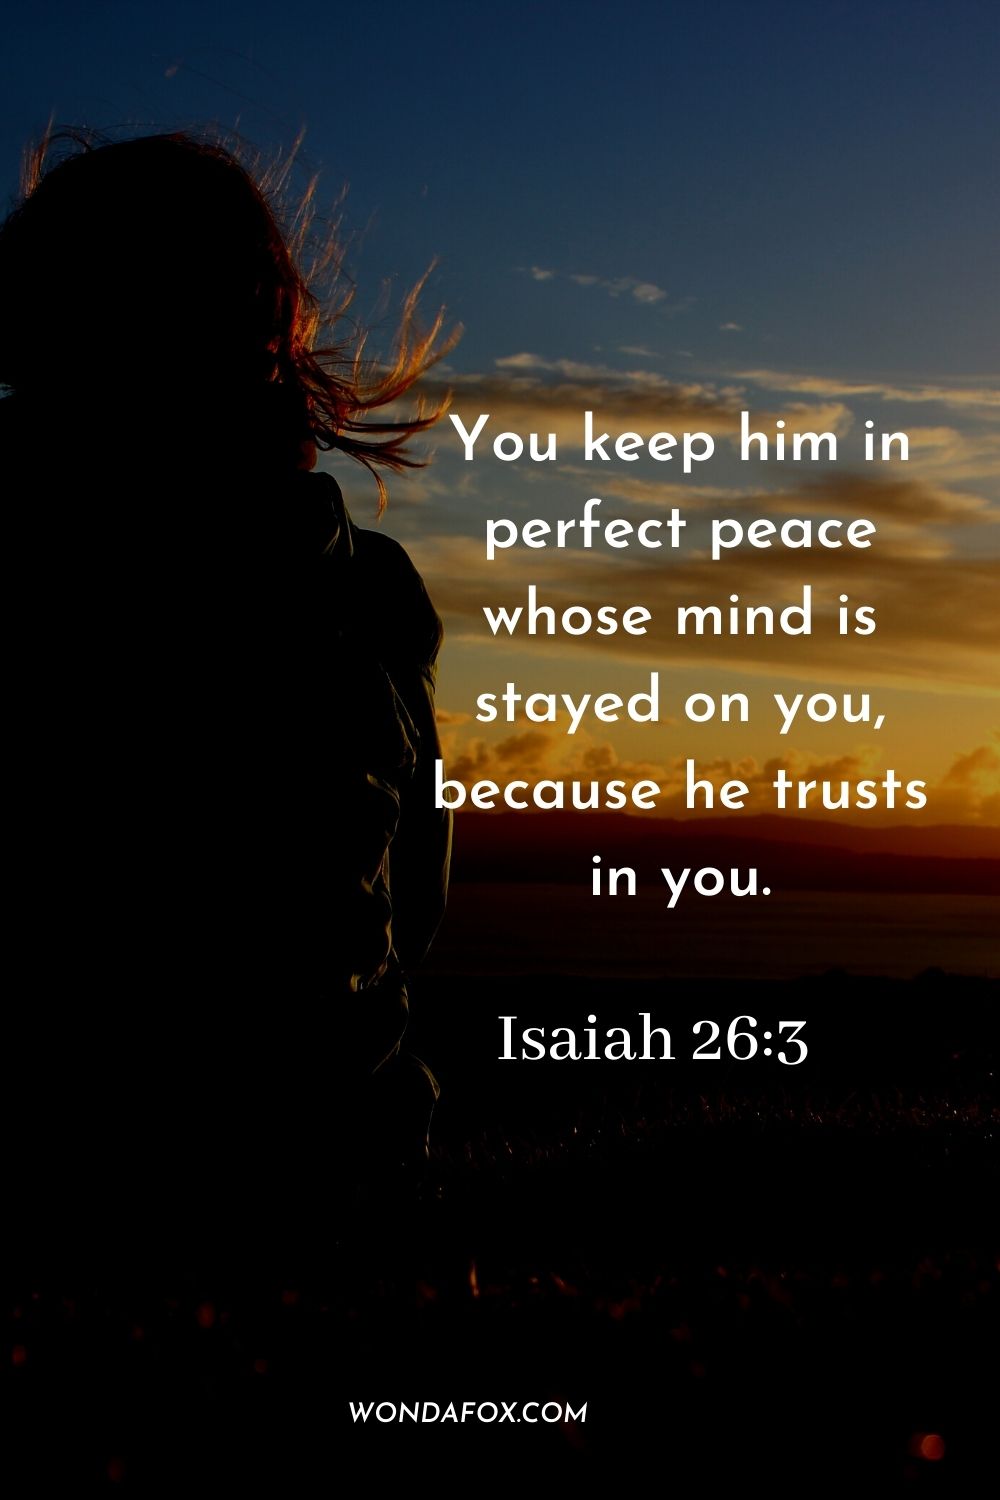 You keep him in perfect peace whose mind is stayed on you, because he trusts in you. Isaiah 26:3